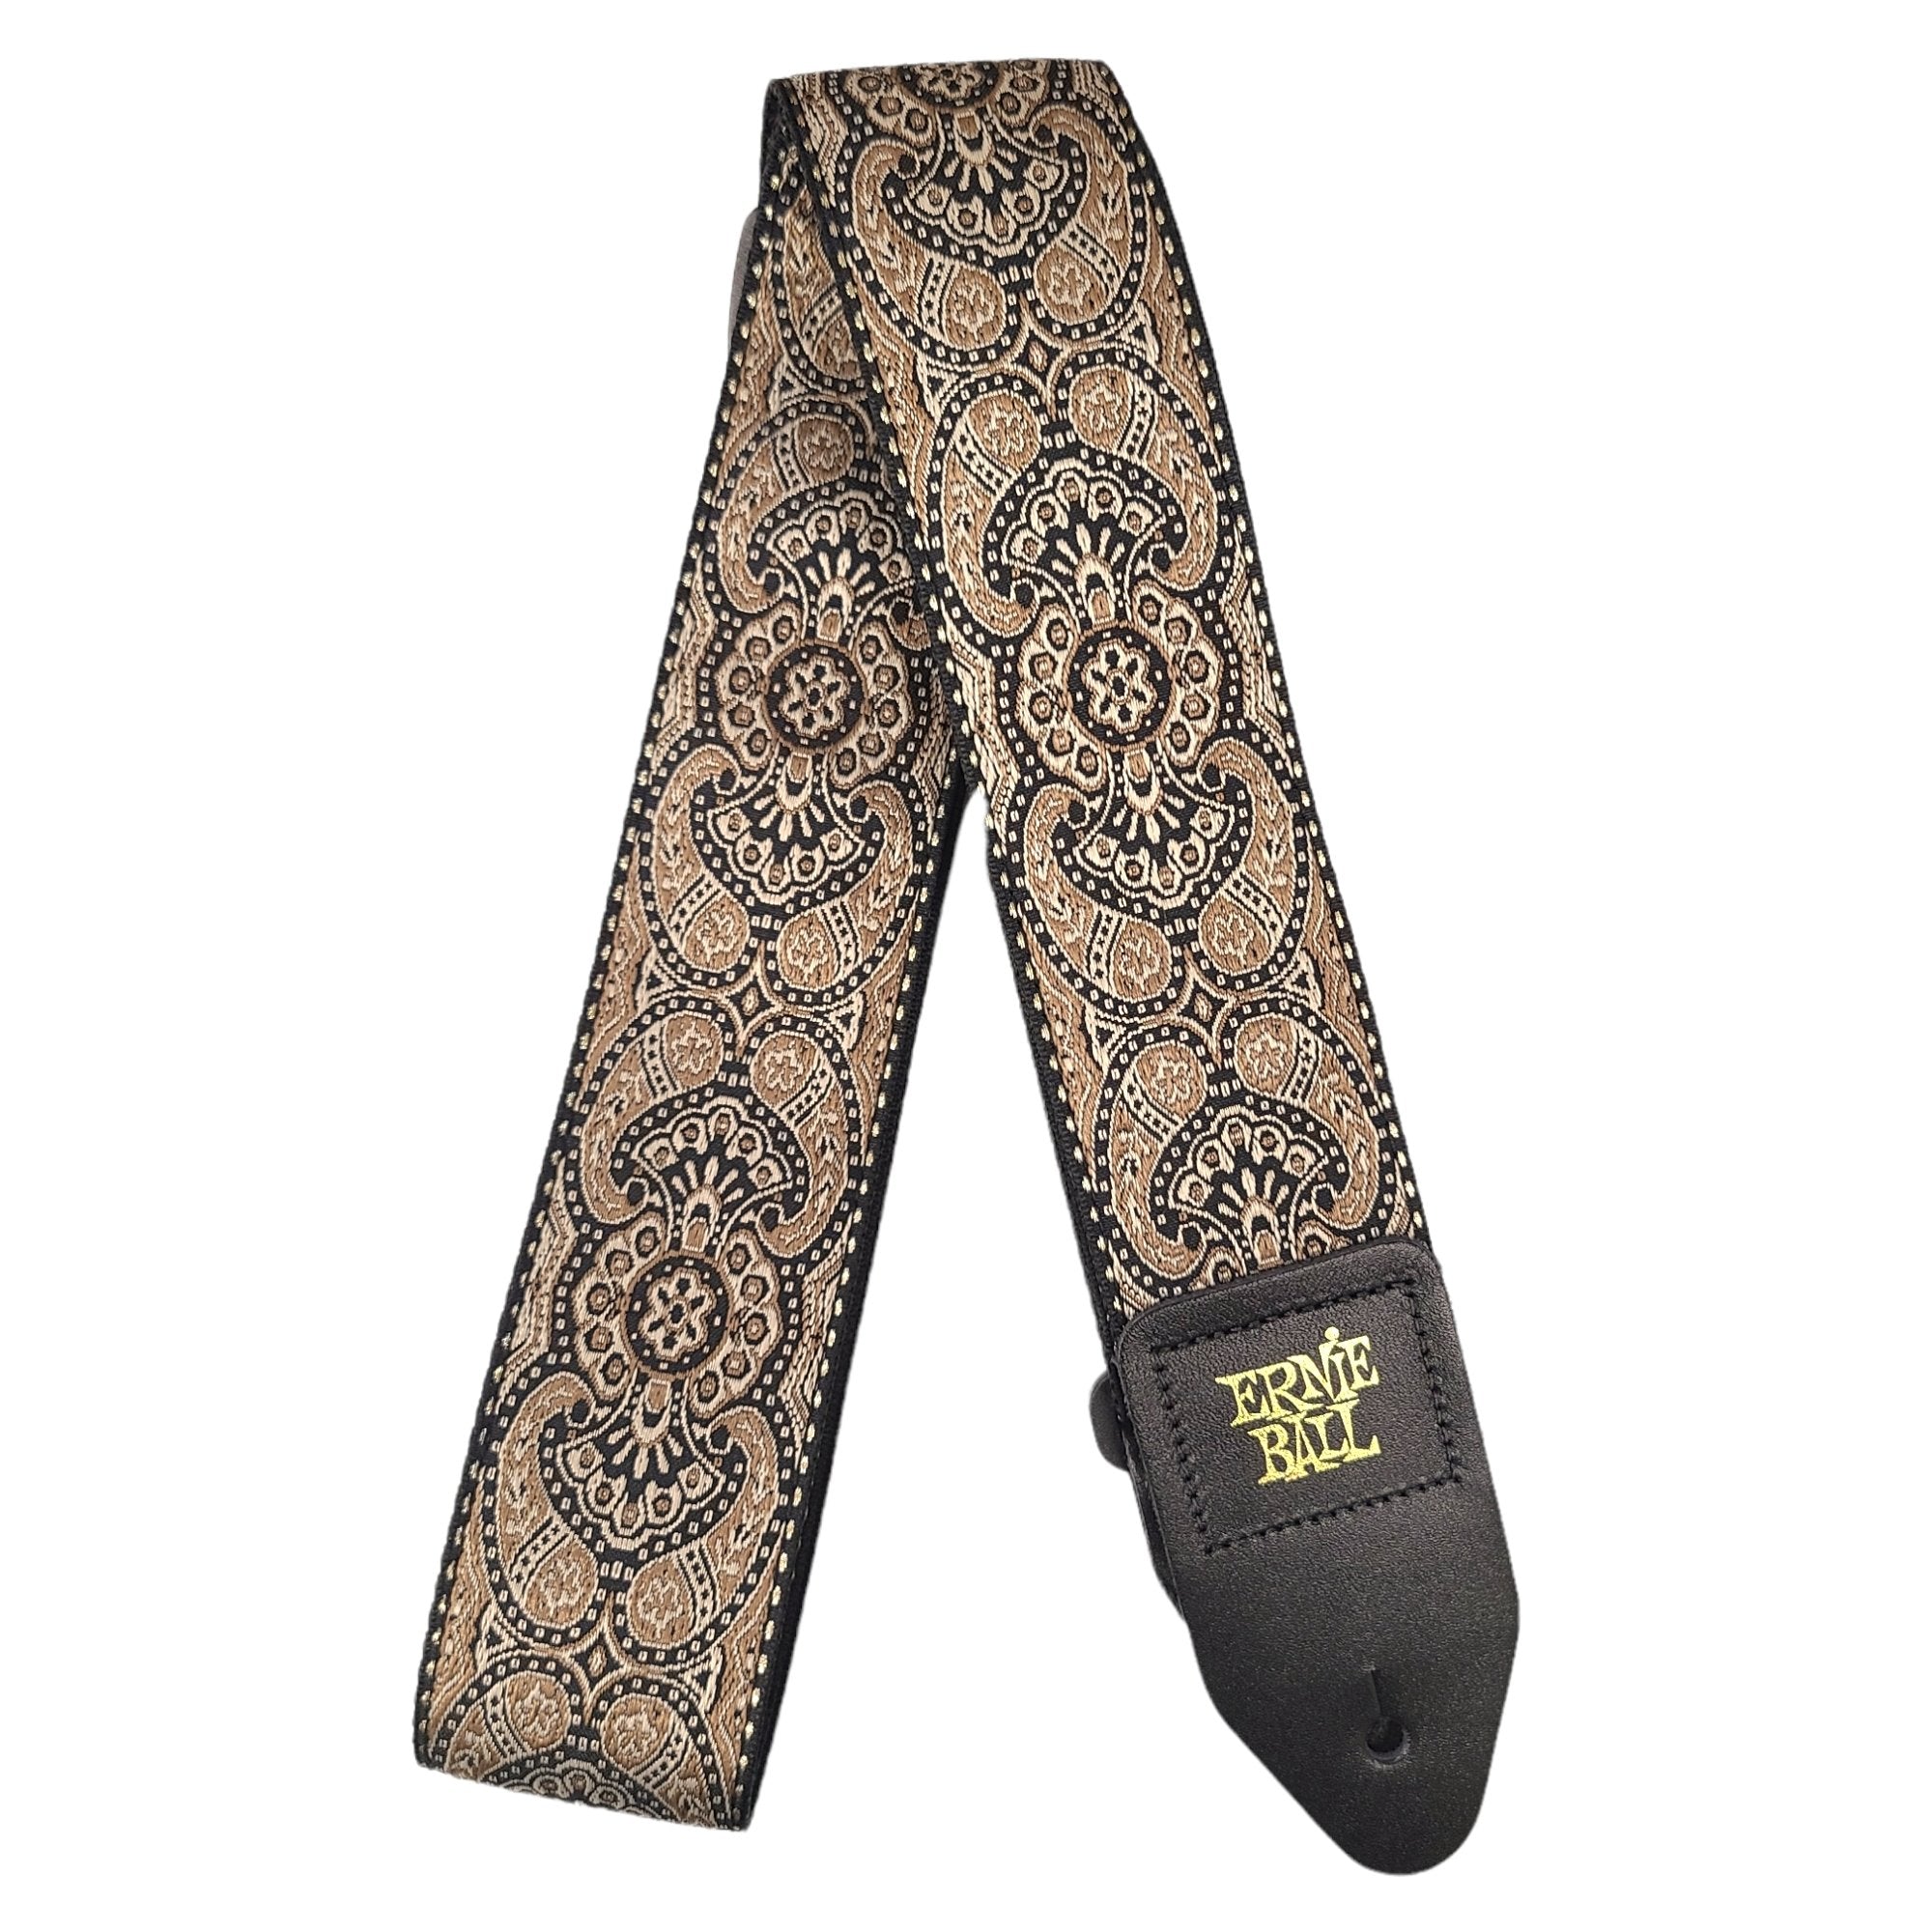 Ernie Ball Jacquard Guitar Strap 2 Inch Various Color Black and Gold Paisley